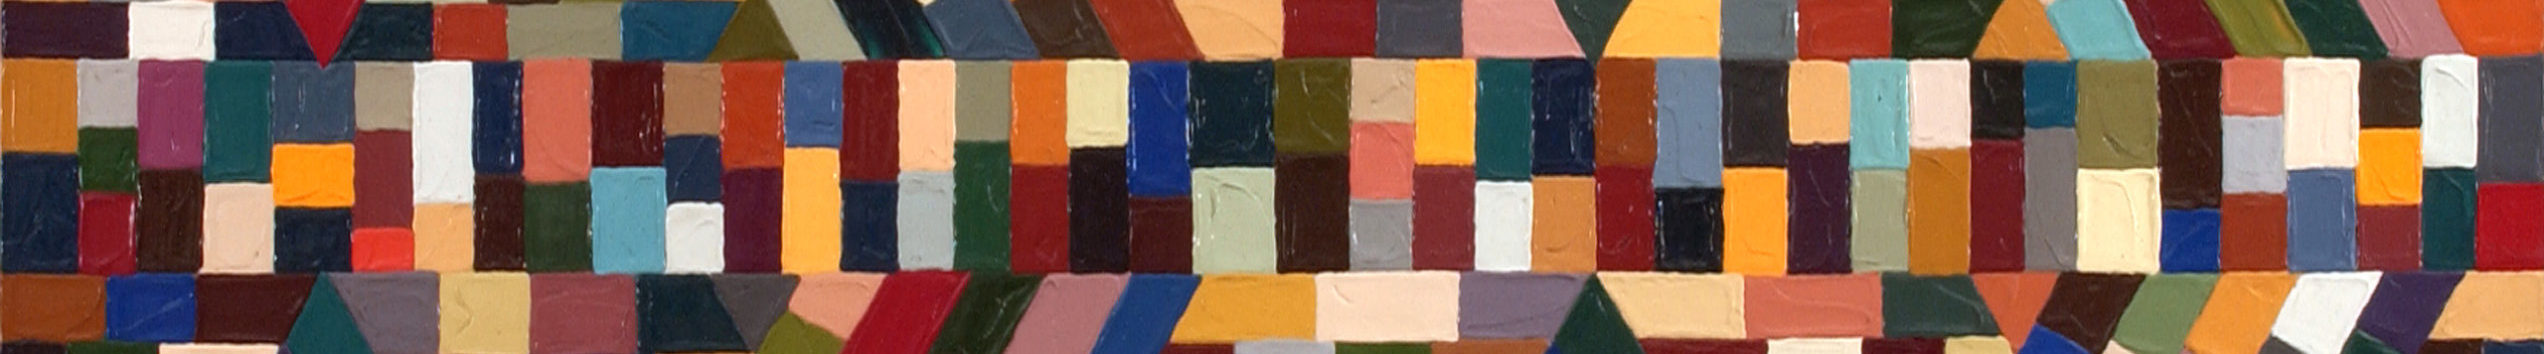 Geometric abstract painting composed of different colored squares arranged in a mosaic-like pattern.